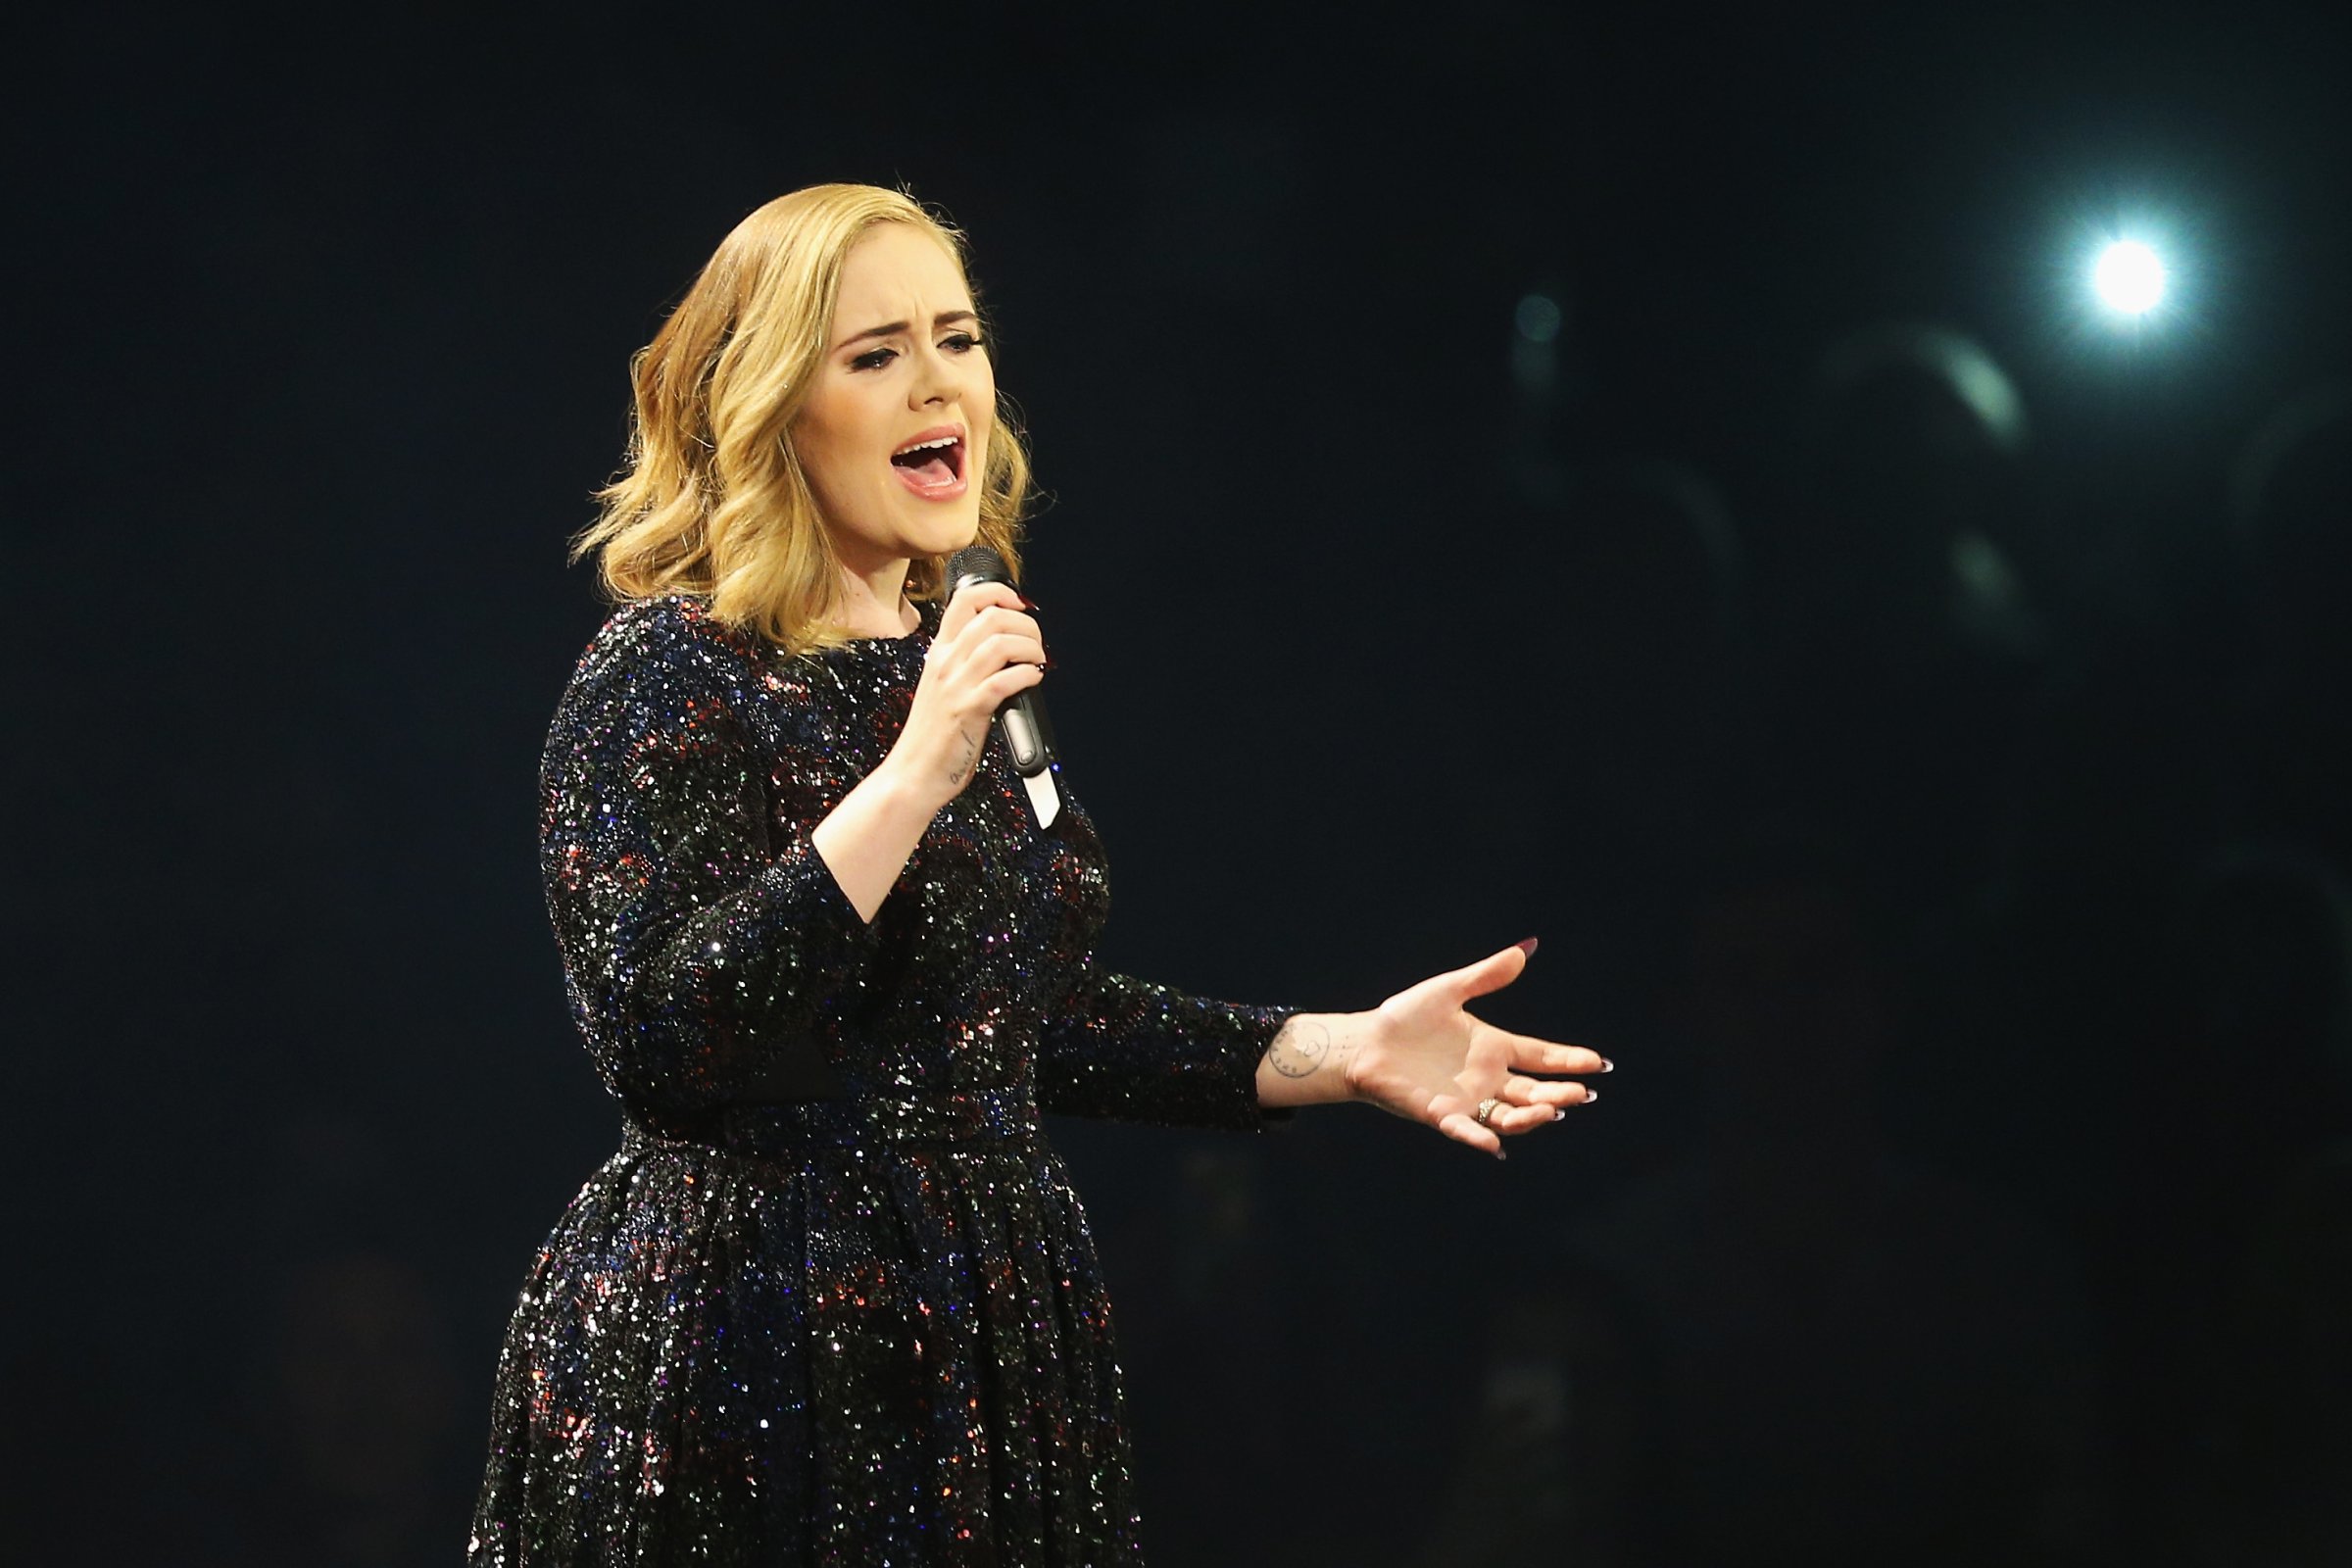 Adele performs at Barclaycard Arena on May 10, 2016 in Hamburg, Germany.